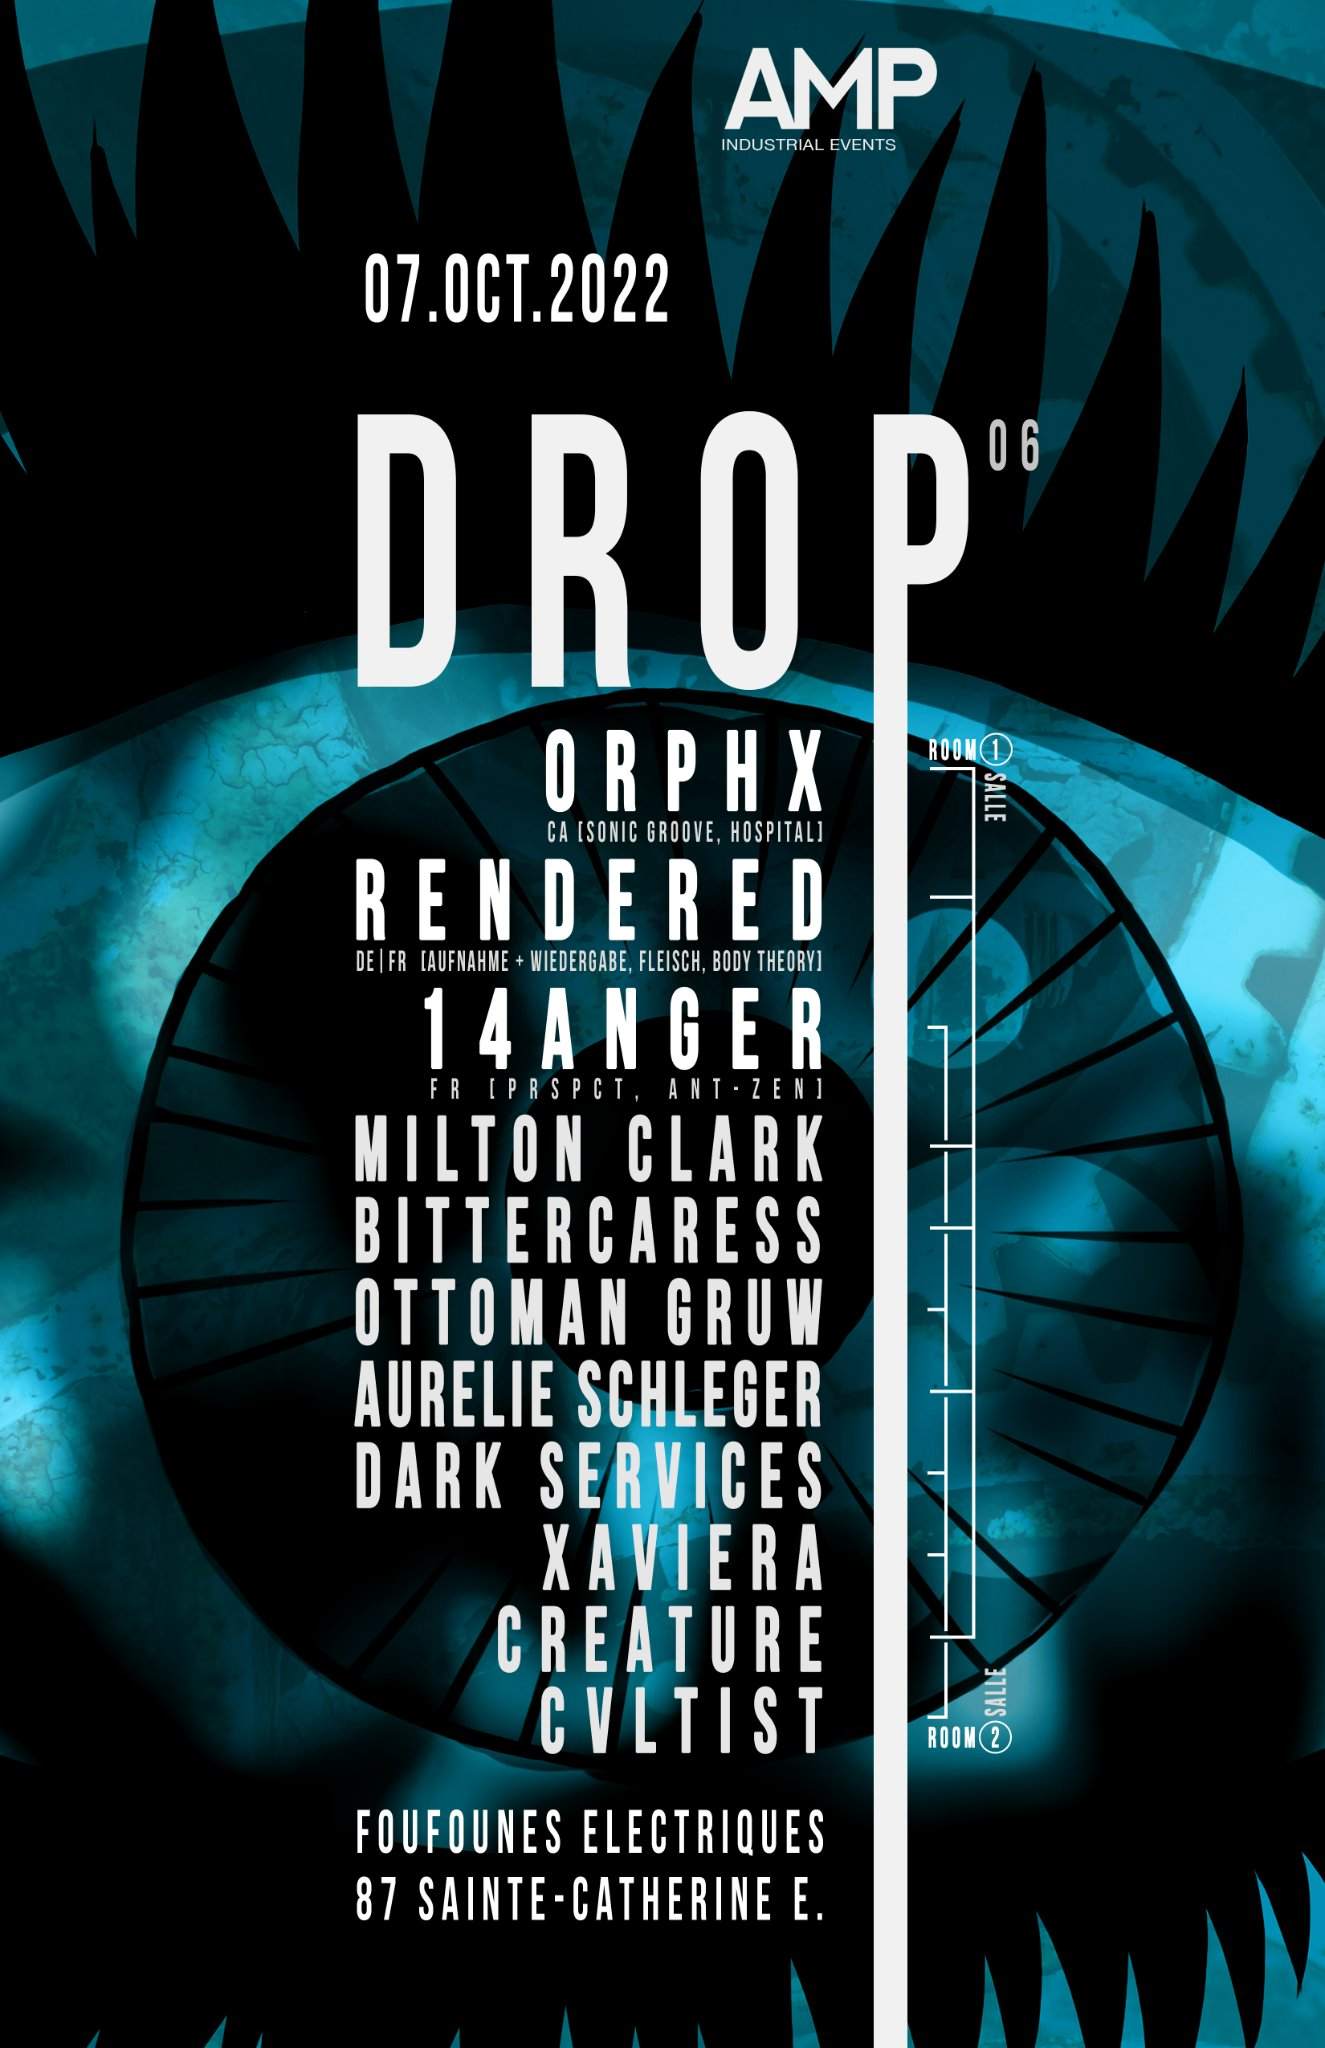 DROP [06] - Orphx, Rendered, 14anger and Guests - Página trasera